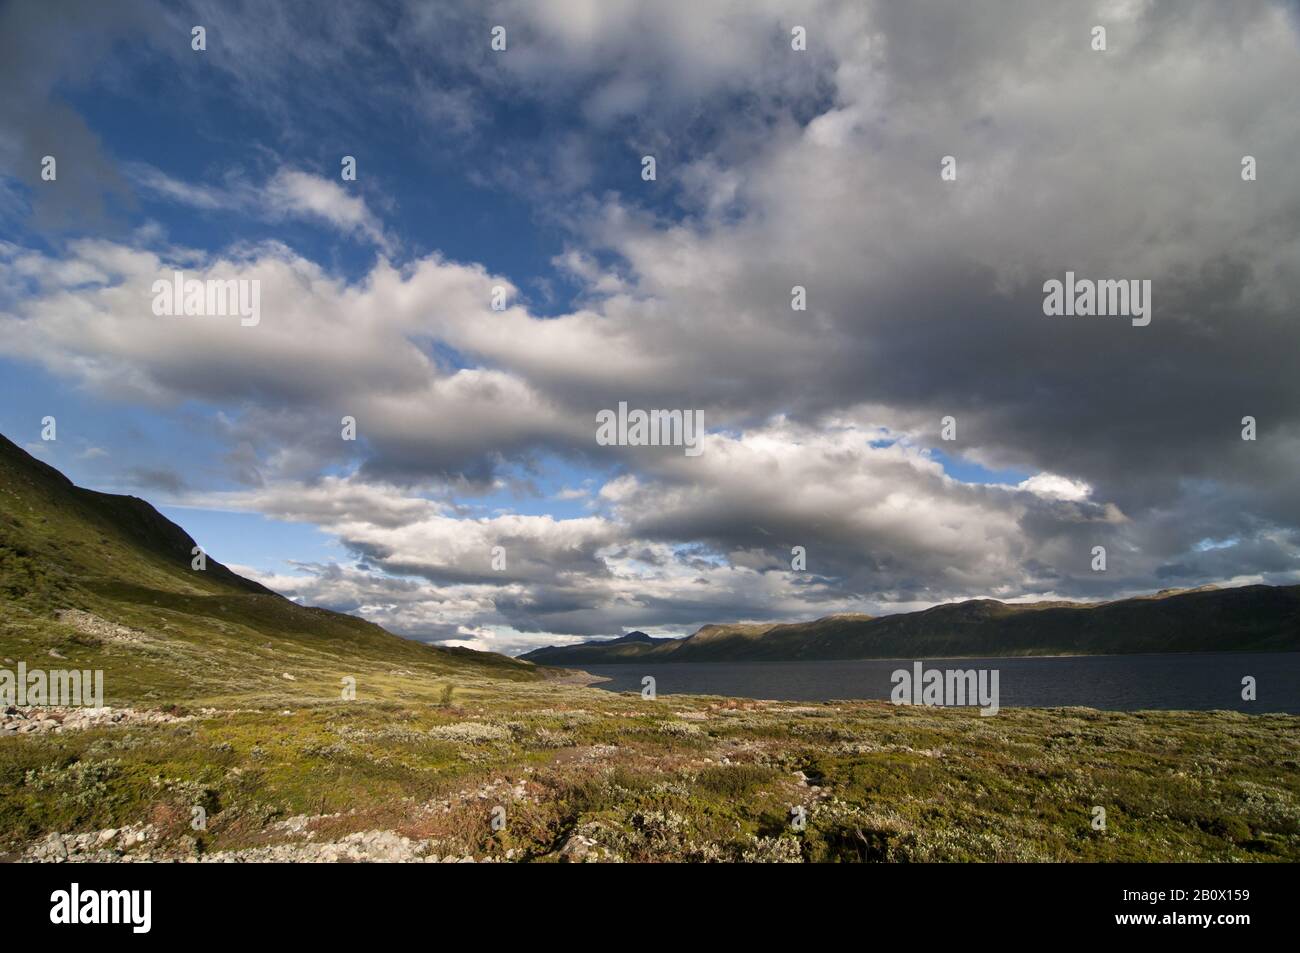 Bygdinsee in fine weather and evening sun, Jotunheimen National Park, Norway, Stock Photo